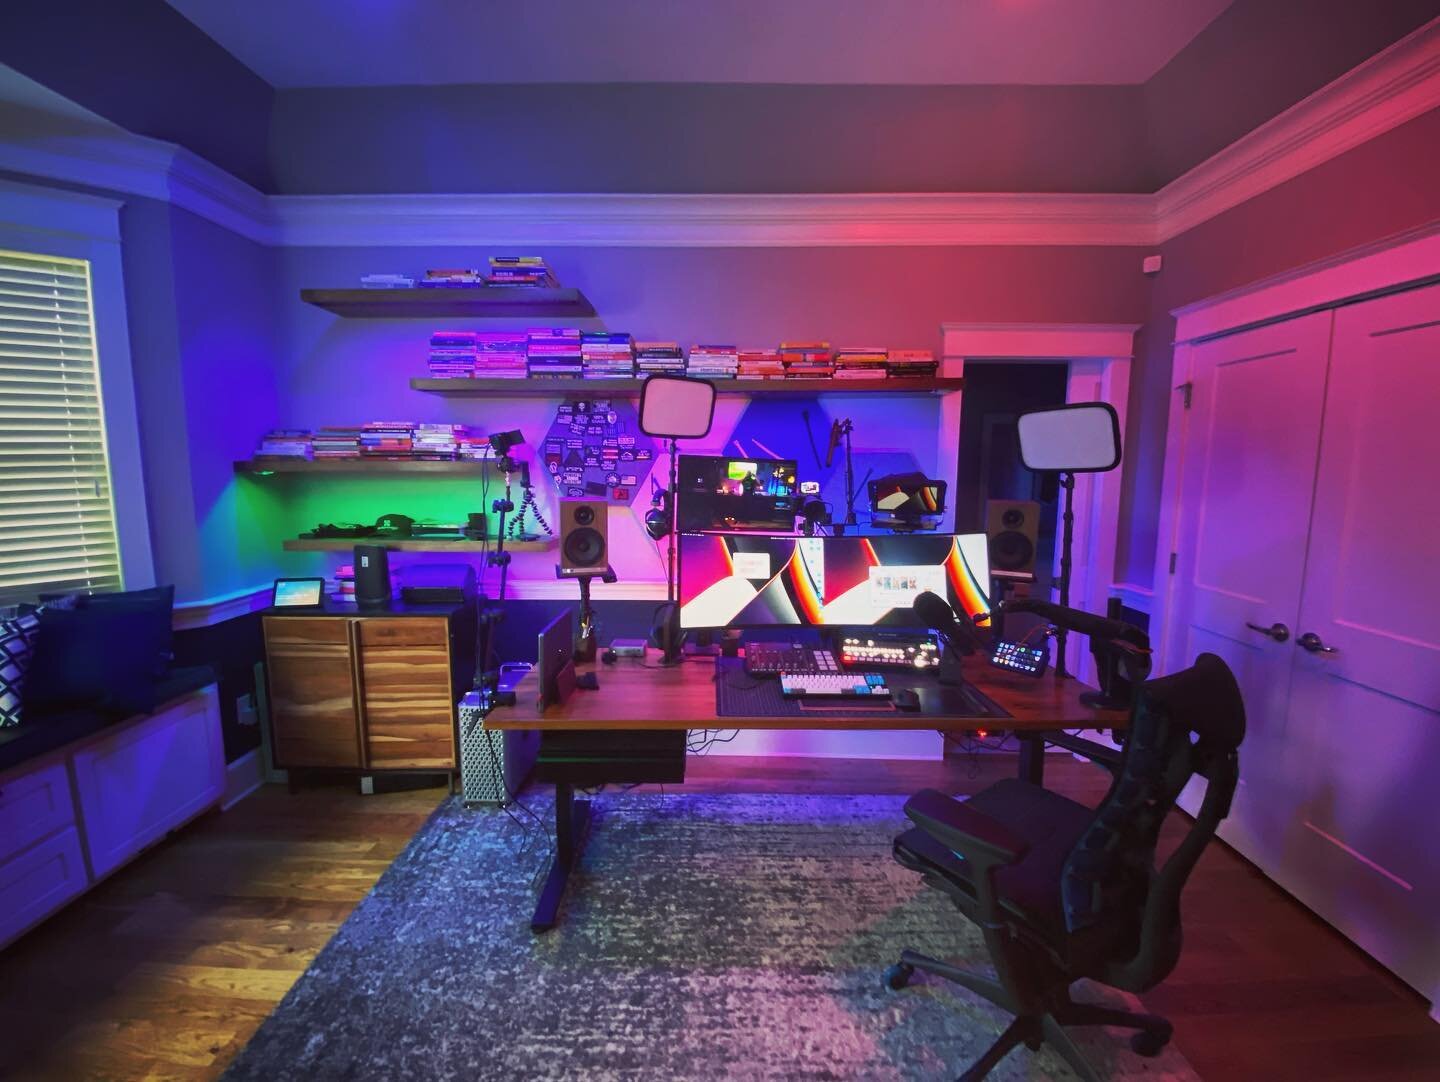 This is why we LOVE what we do! ❤️❤️❤️ Starting your day off bright and early at a client&rsquo;s home is always a treat, especially with such an elaborate and purposeful setup! 🌈 Happy hump day everyone 🤓
#rgbled #pcgamingsetup #applesilicon #macb